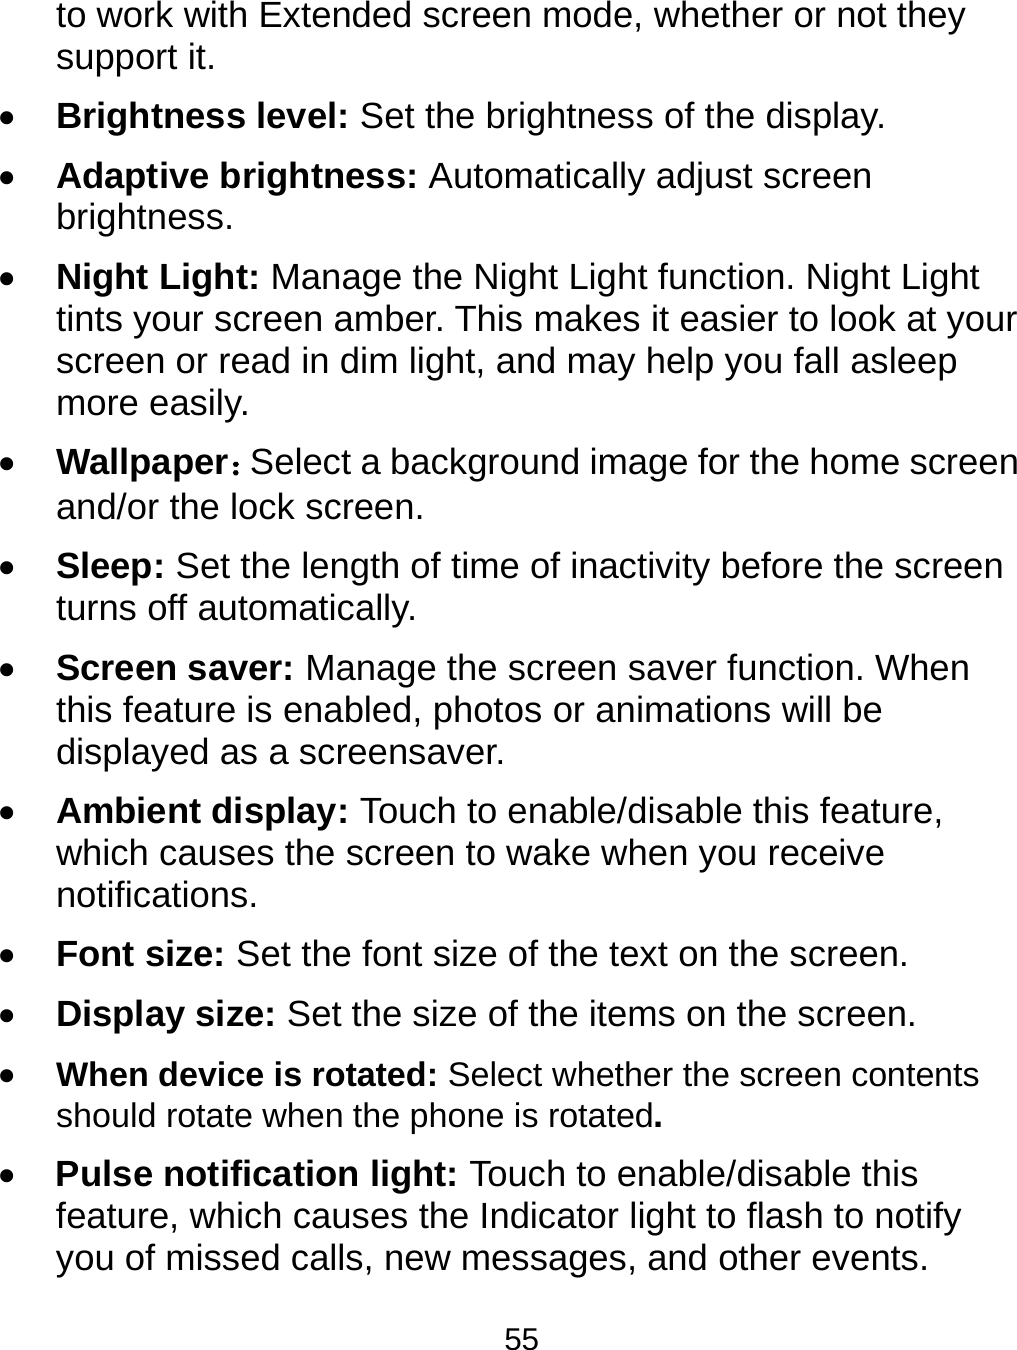  55 to work with Extended screen mode, whether or not they support it.    Brightness level: Set the brightness of the display.  Adaptive brightness: Automatically adjust screen brightness.  Night Light: Manage the Night Light function. Night Light tints your screen amber. This makes it easier to look at your screen or read in dim light, and may help you fall asleep more easily.    Wallpaper：Select a background image for the home screen and/or the lock screen.    Sleep: Set the length of time of inactivity before the screen turns off automatically.  Screen saver: Manage the screen saver function. When this feature is enabled, photos or animations will be displayed as a screensaver.  Ambient display: Touch to enable/disable this feature, which causes the screen to wake when you receive notifications.  Font size: Set the font size of the text on the screen.  Display size: Set the size of the items on the screen.  When device is rotated: Select whether the screen contents should rotate when the phone is rotated.  Pulse notification light: Touch to enable/disable this feature, which causes the Indicator light to flash to notify you of missed calls, new messages, and other events. 